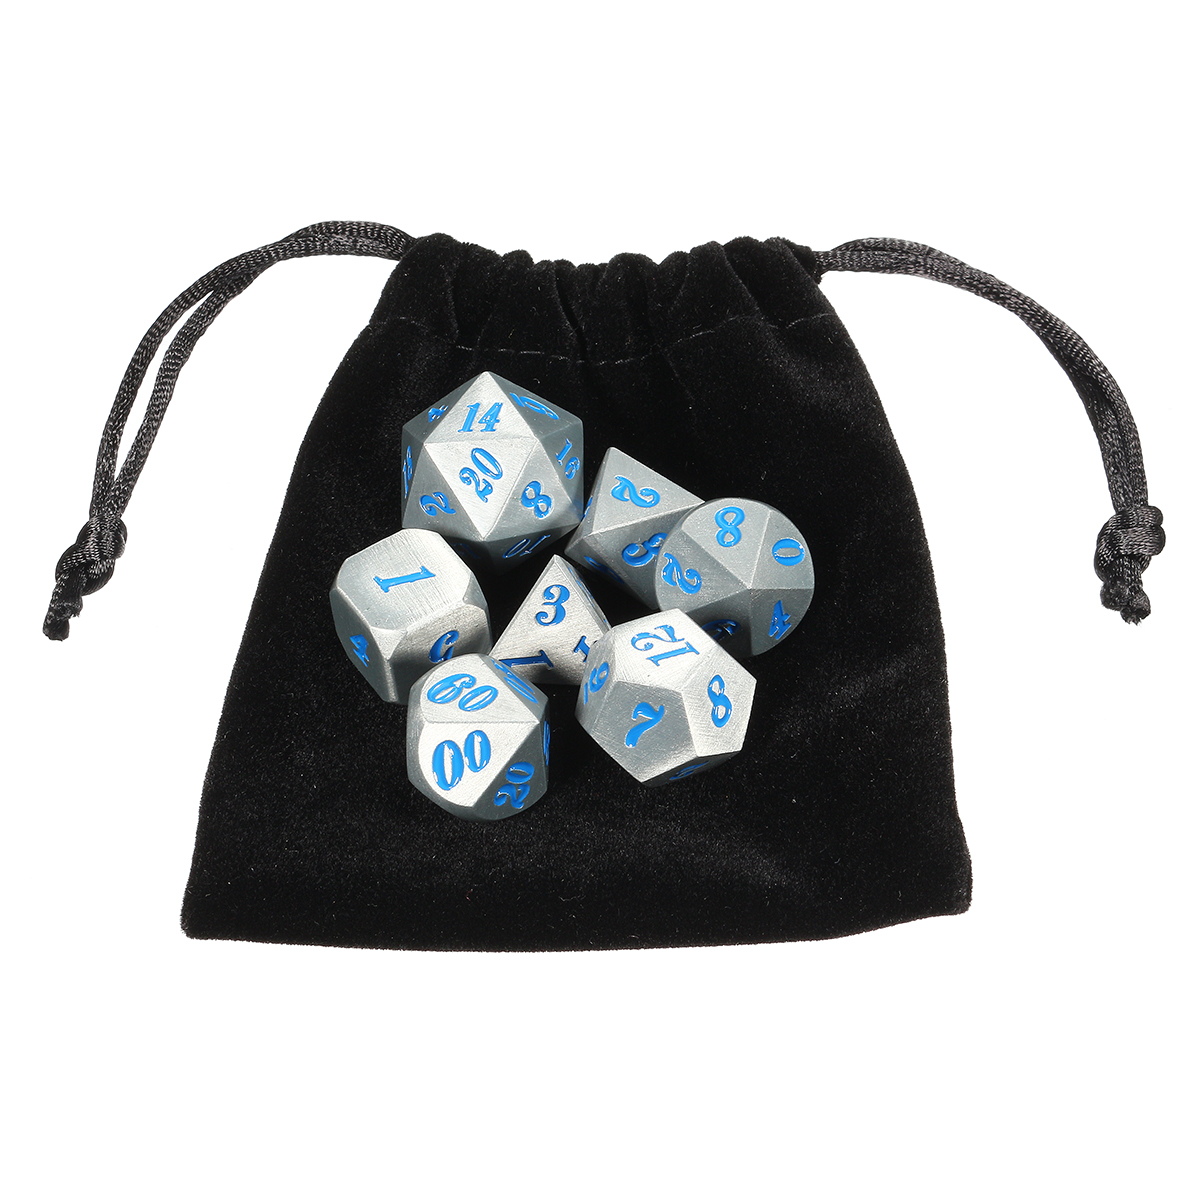 7Pc-Solid-Metal-Heavy-Dice-Set-Polyhedral-Dices-Role-Playing-Games-Dice-Gadget-RPG-1391316-4